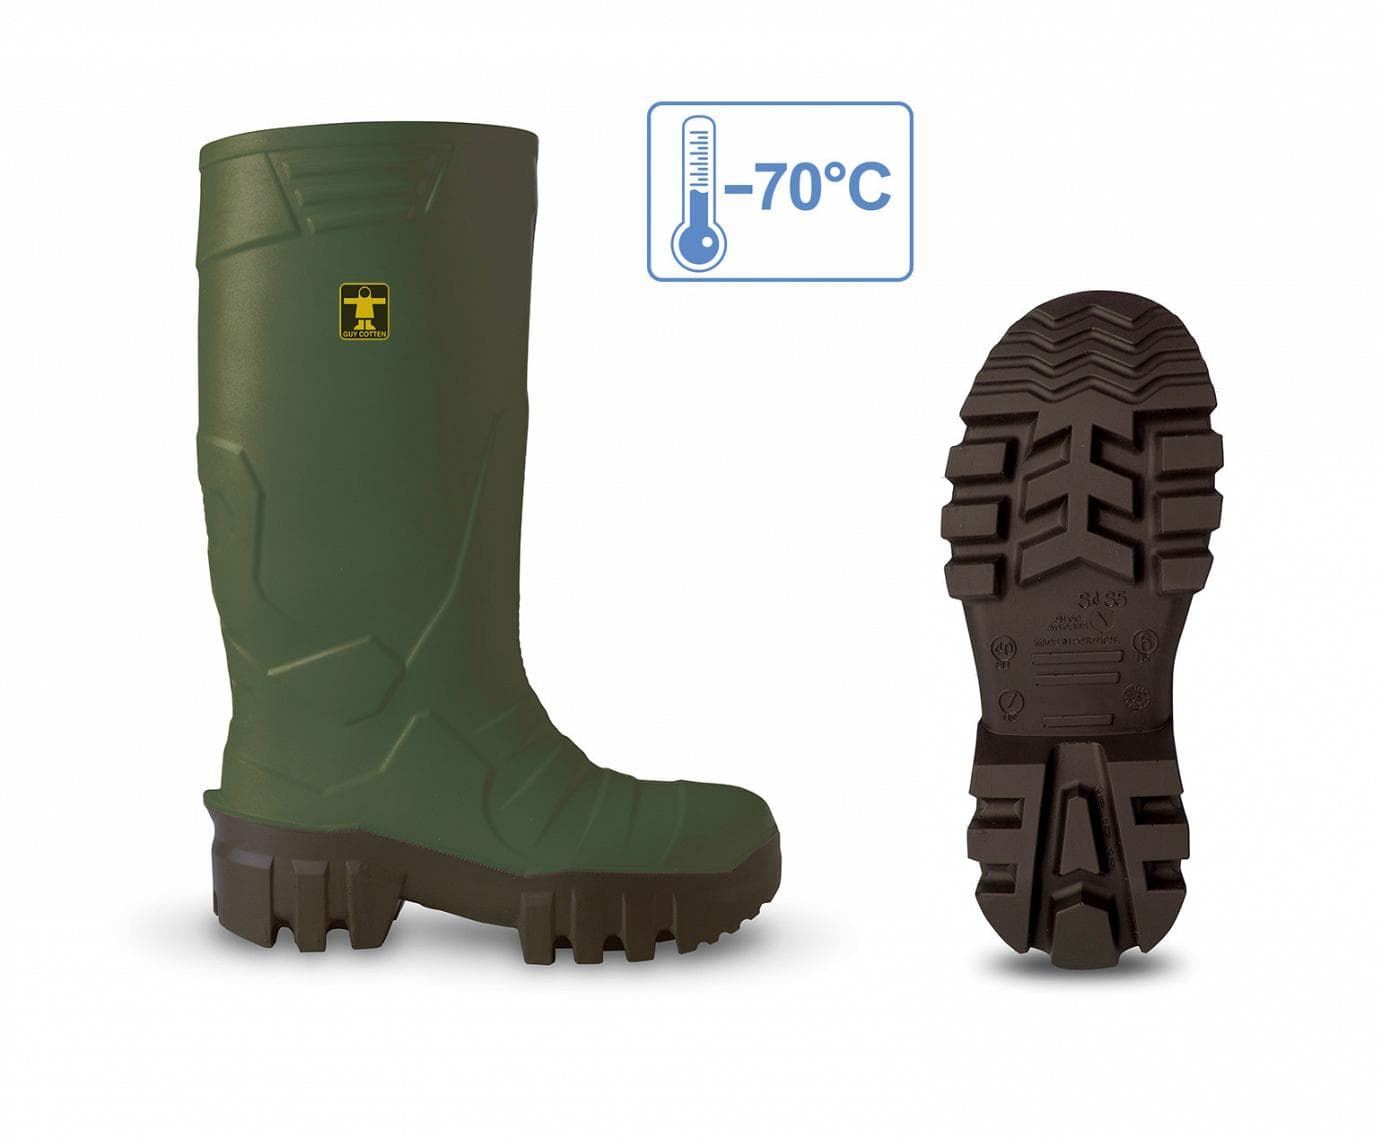 Bota impermeable GUY COTTEN GC Thermo - Imagen 3